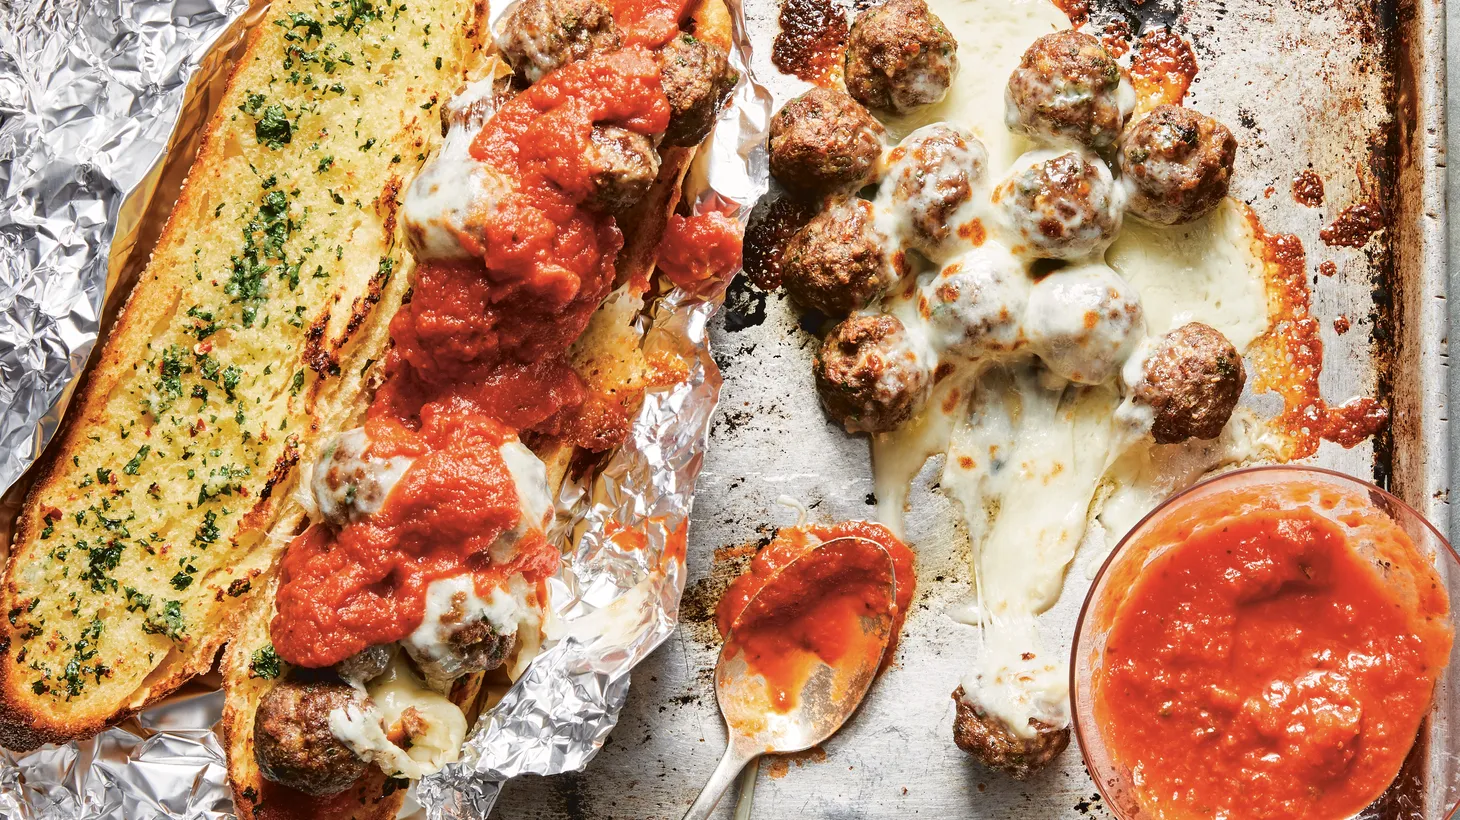 Just in time for football season, cookbook author Melissa Clark scores a touchdown with a recipe for a one sheet pan meatball sub.